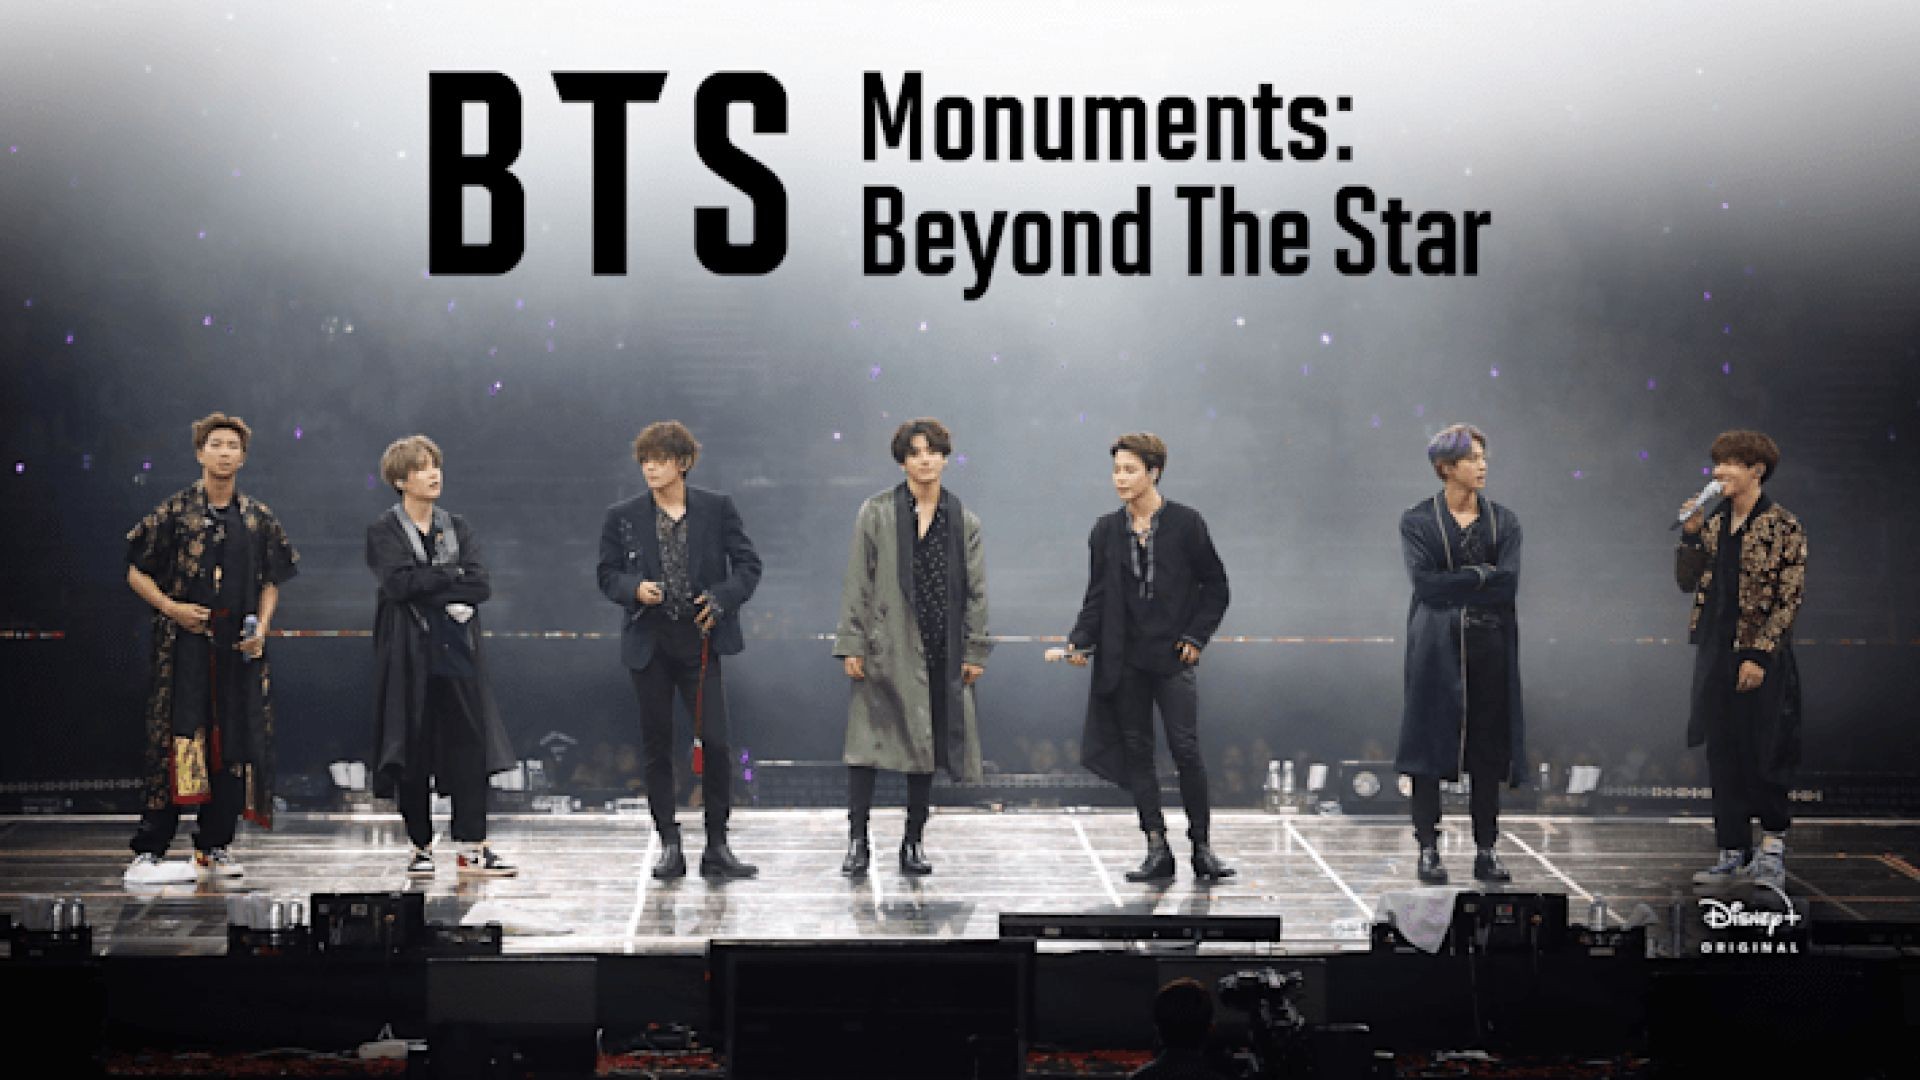 ep  3 - Pursuit of Happiness BTS Monuments: Beyond The Star